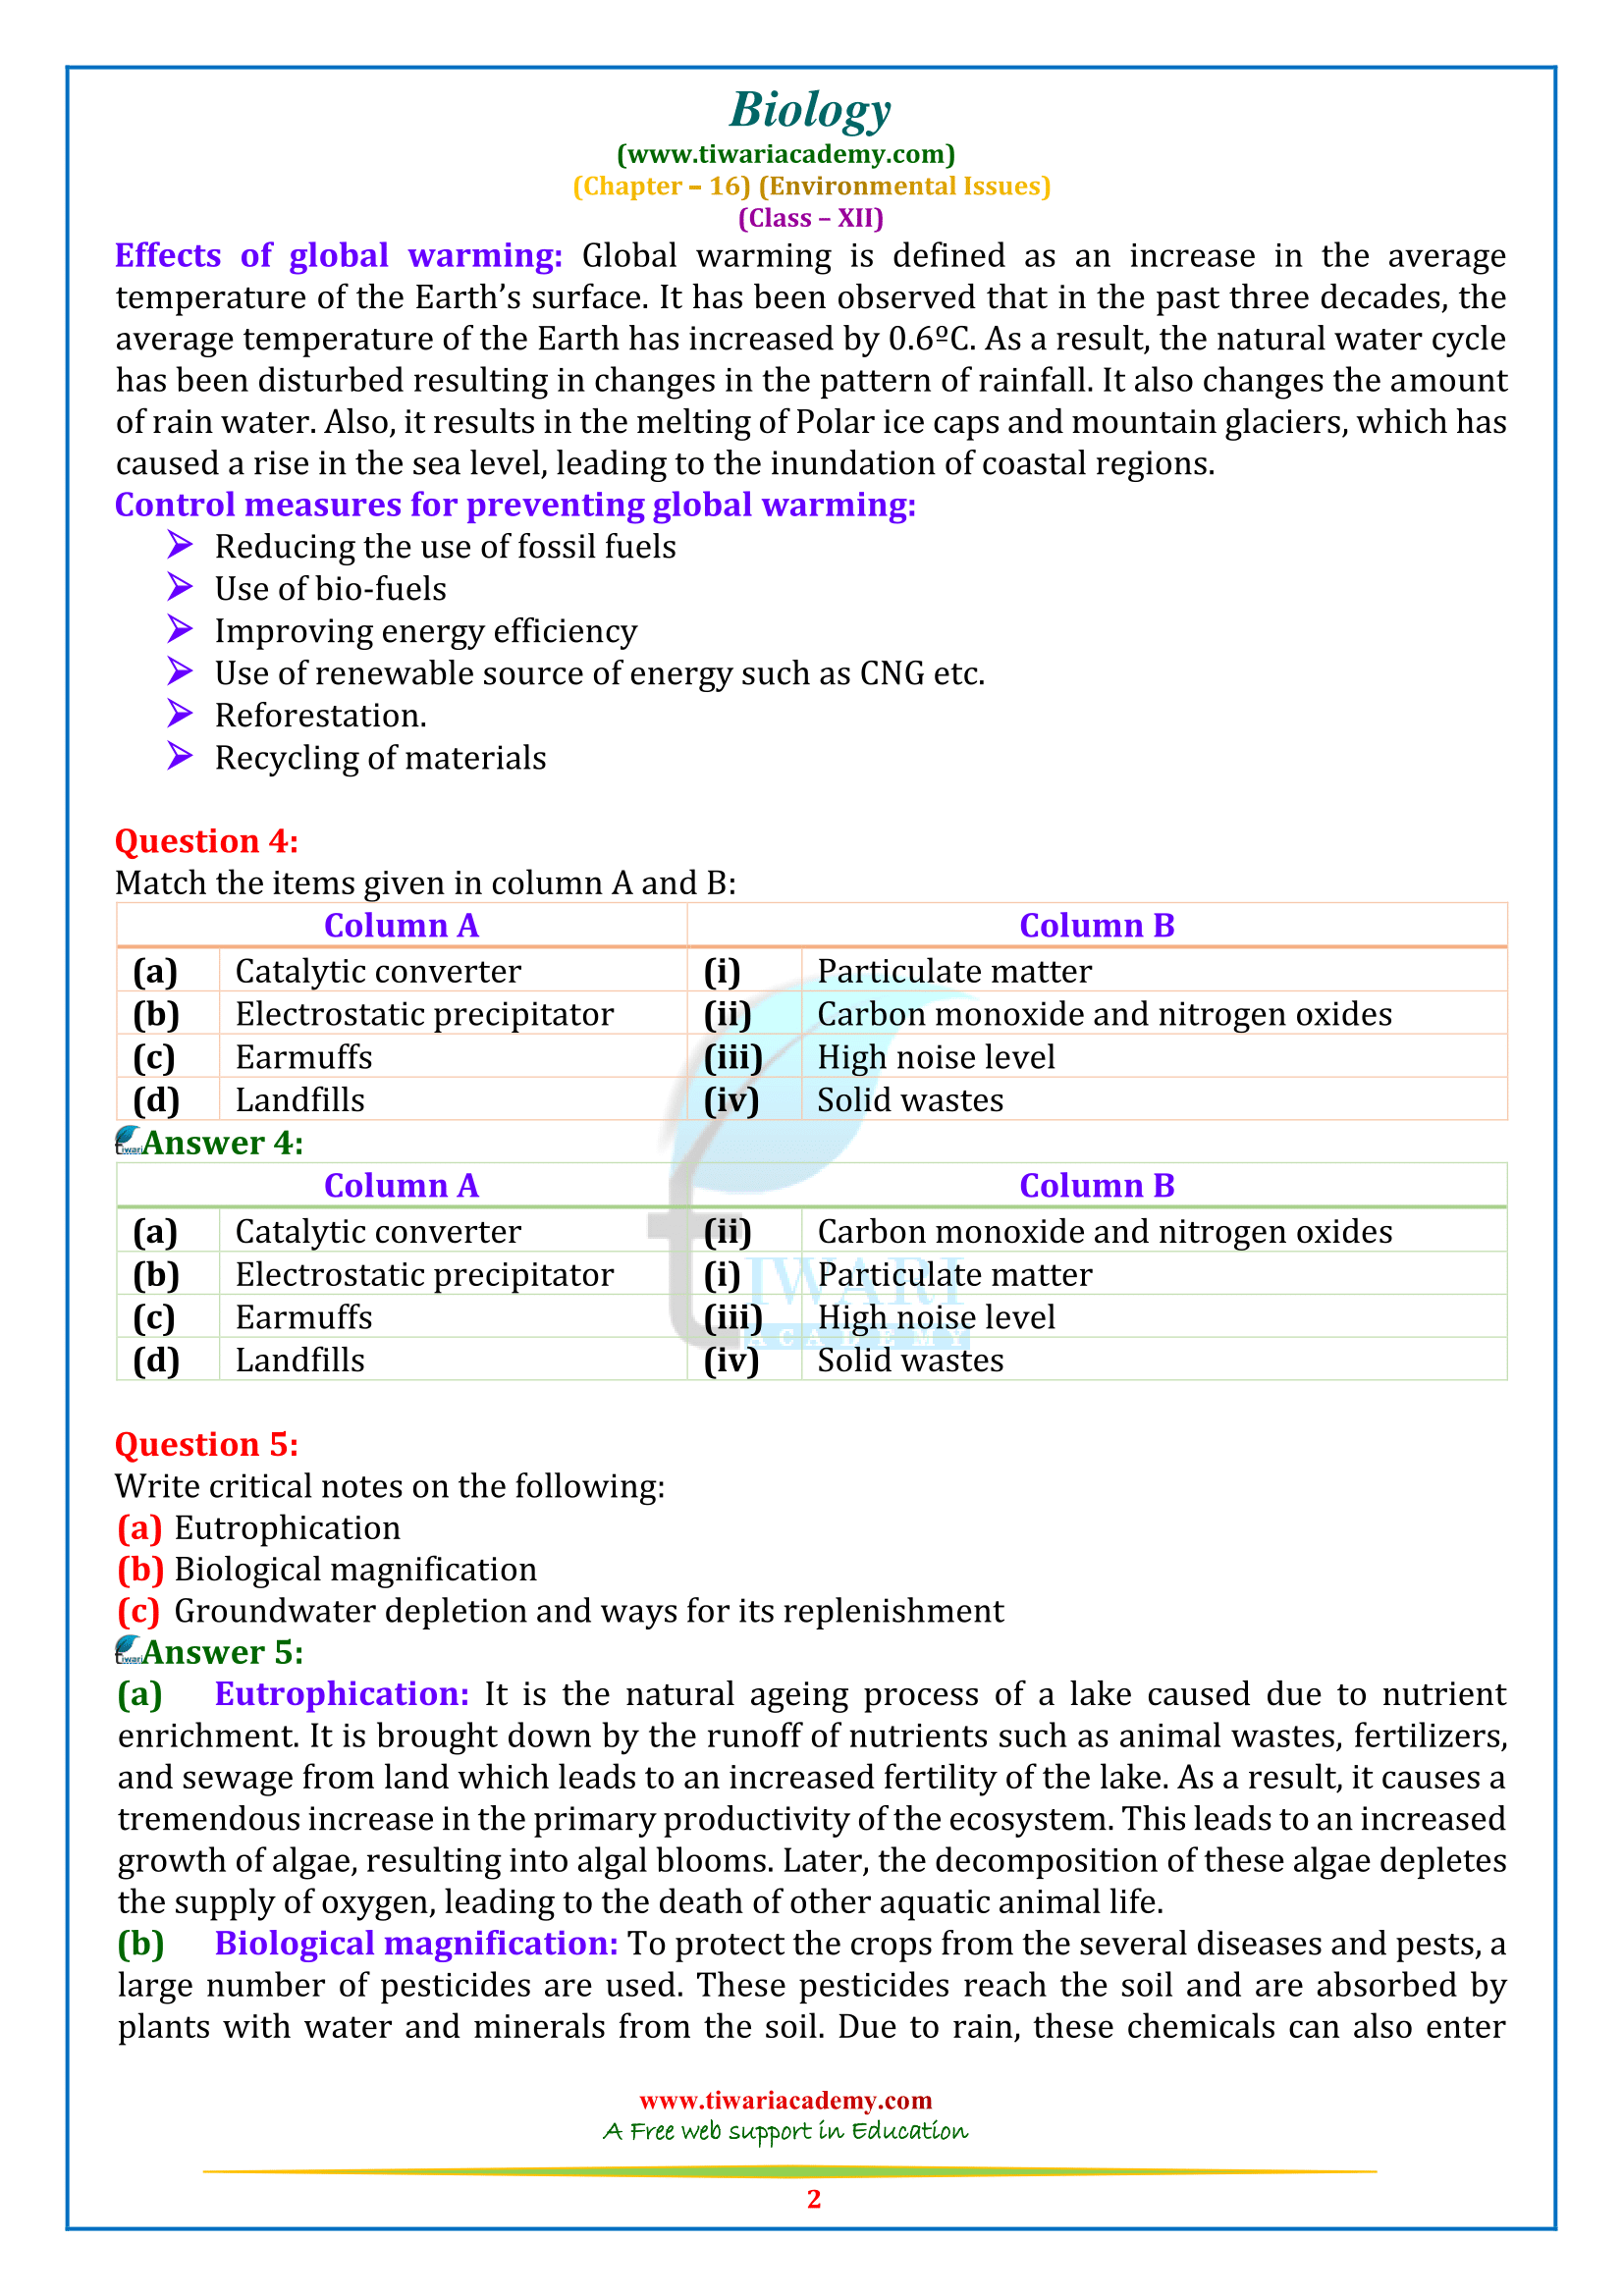 NCERT Solutions for Class 12 Biology Chapter 16 in PDF